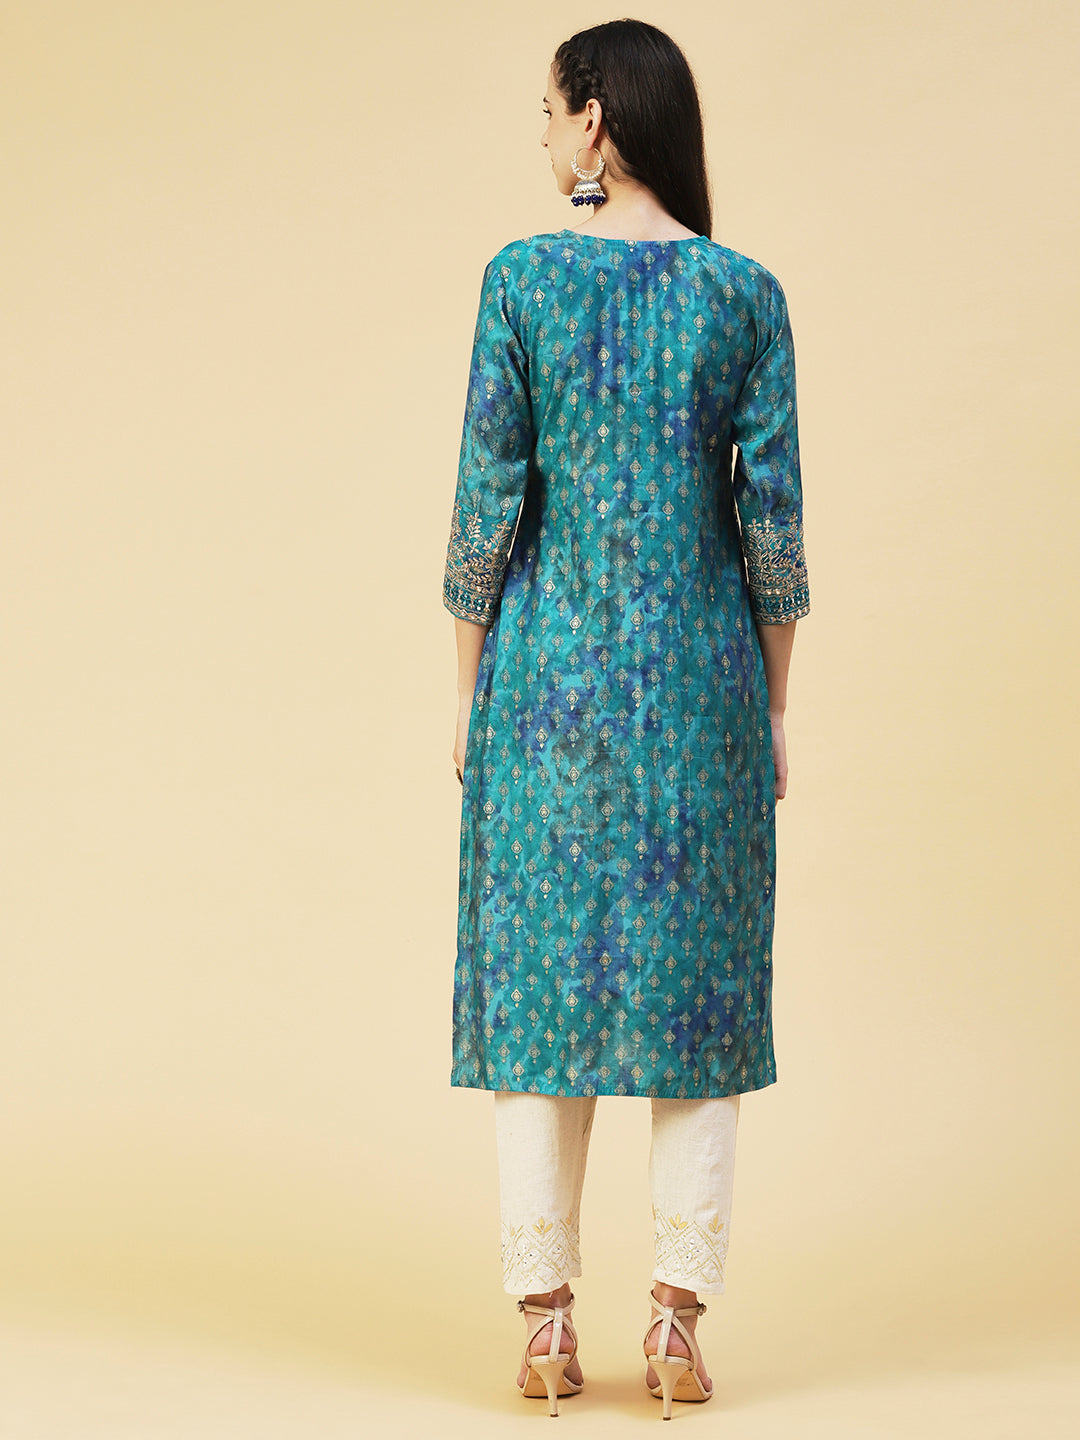 Ethnic Printed & Embroidered Straight Fit Kurta - Turquoise Blue